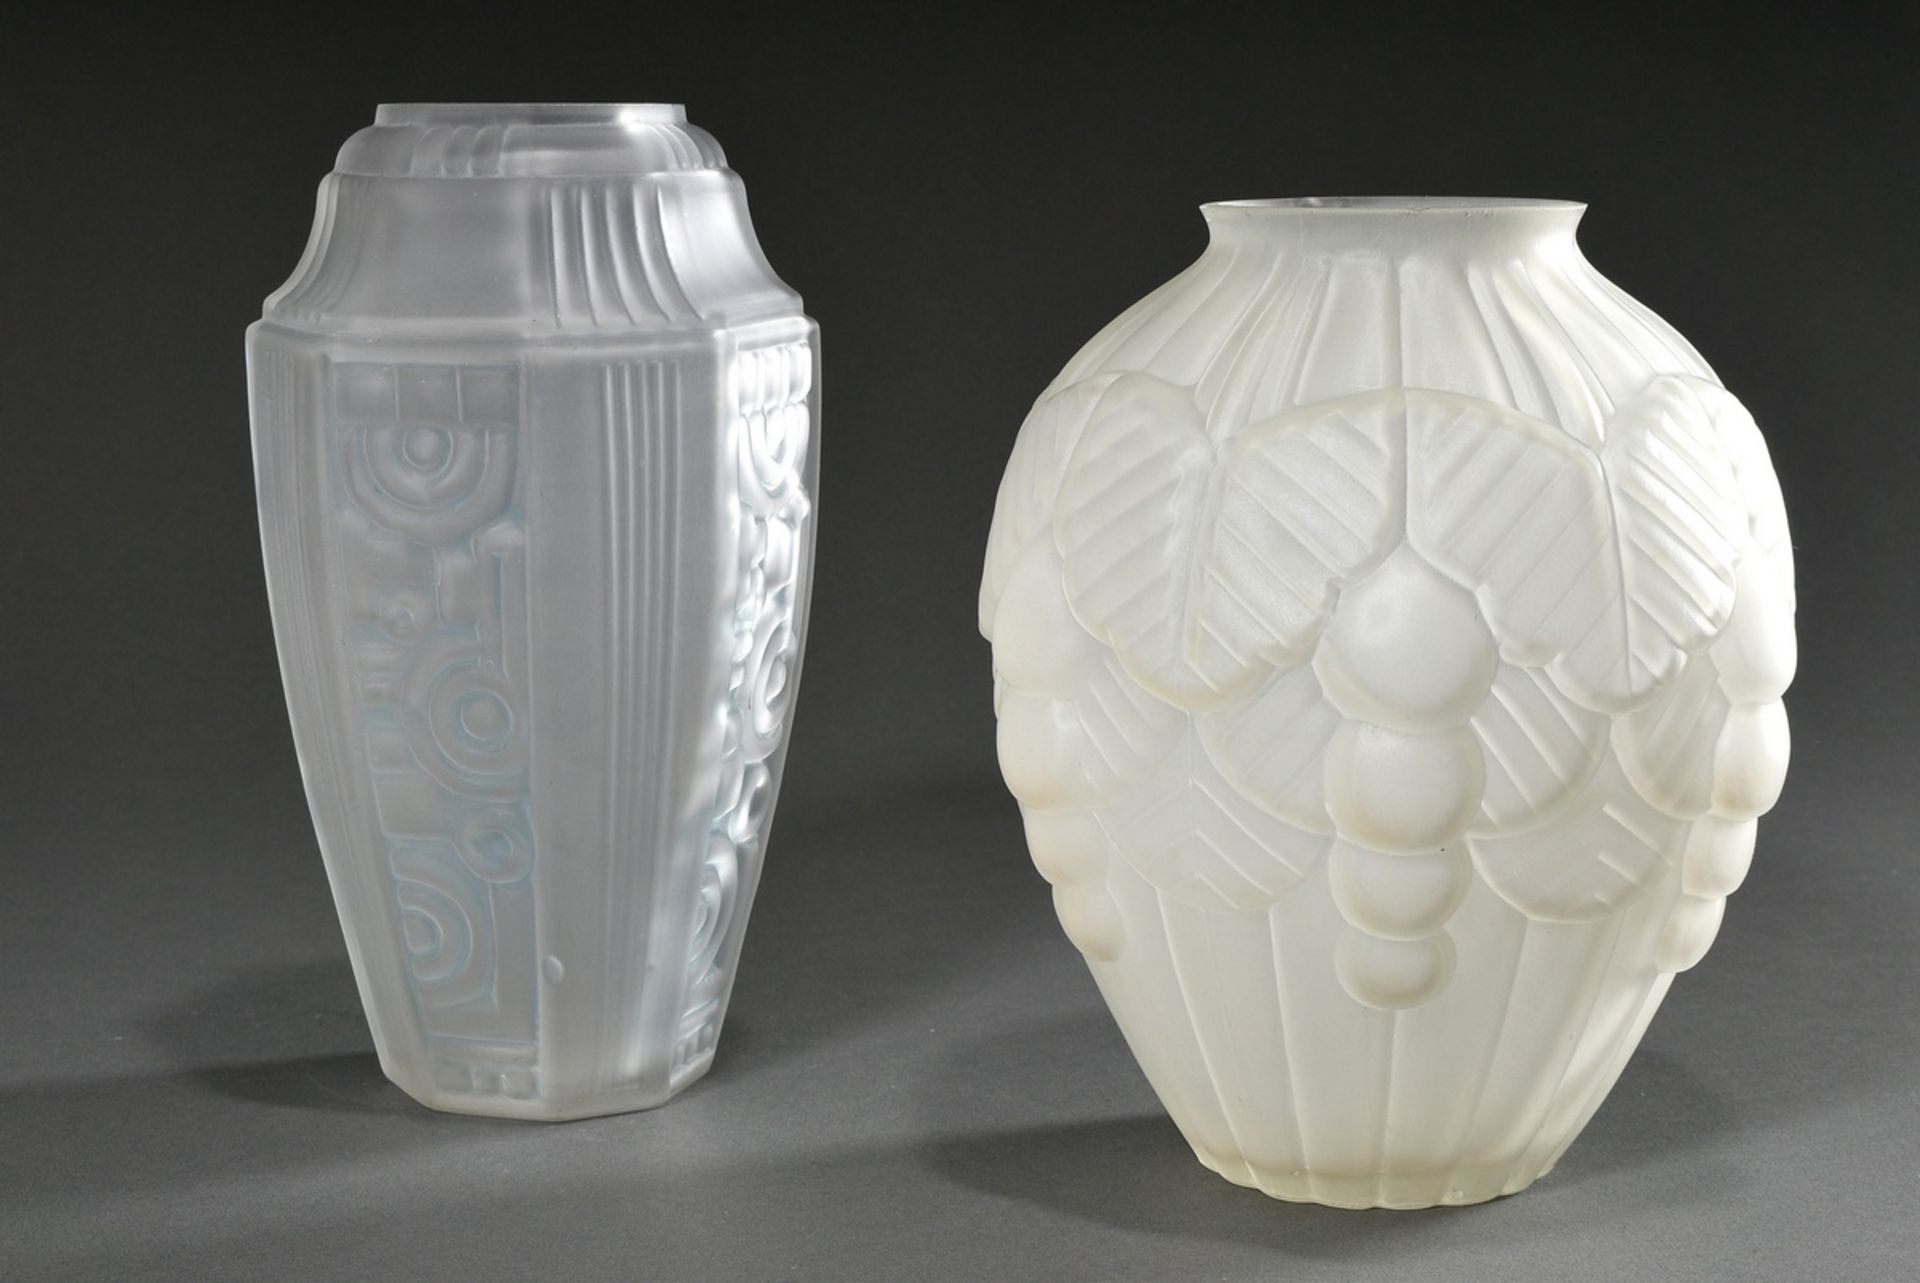 2 Various Art Deco glass vases blown into the mould with geometric and floral abstract patterns, ma